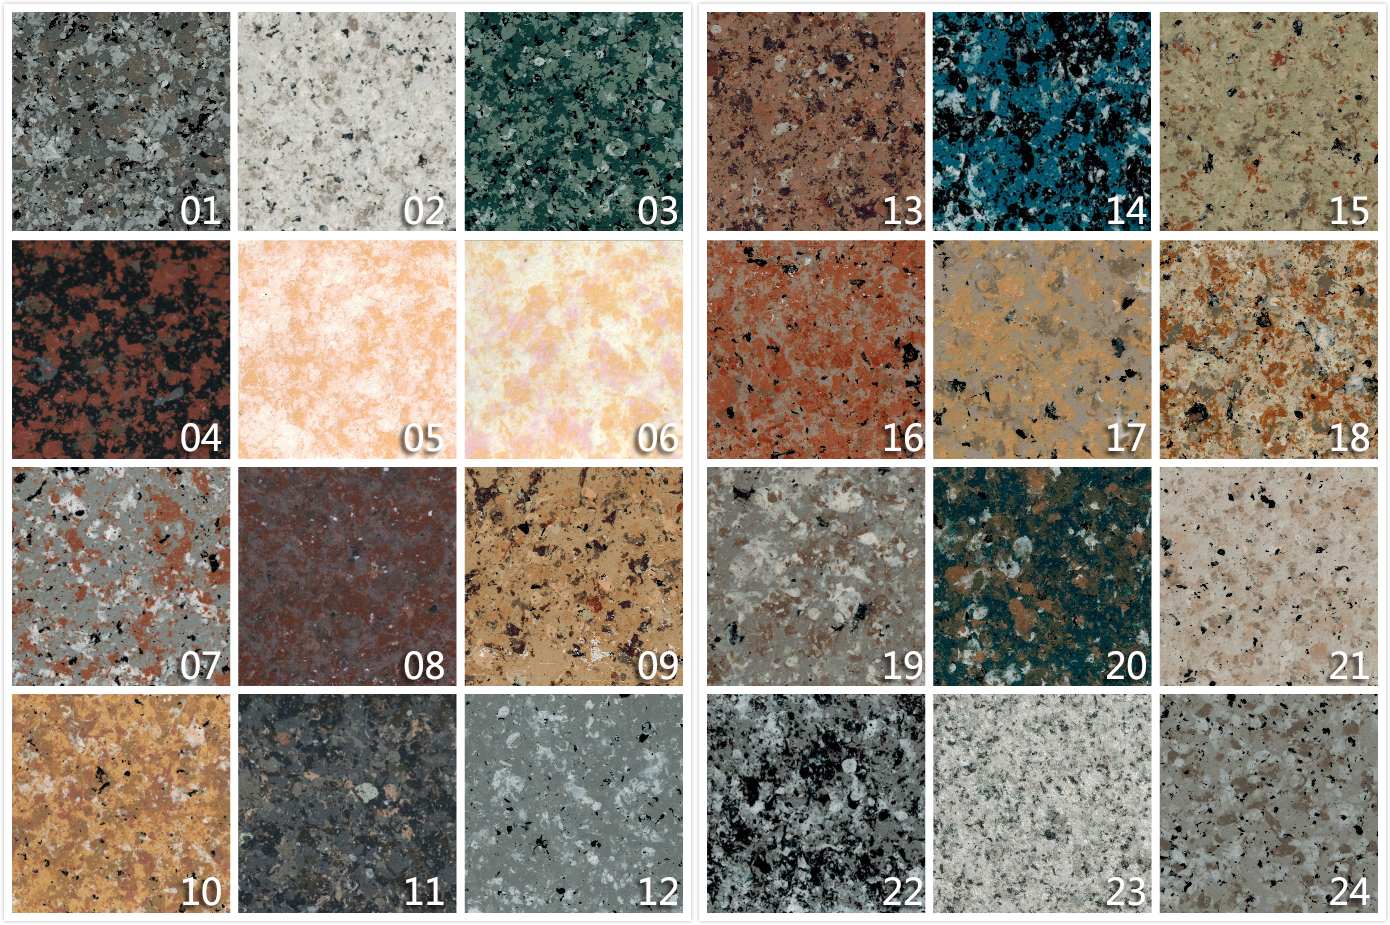 High quality Multicolor Wall Paint is designed to simulate granite